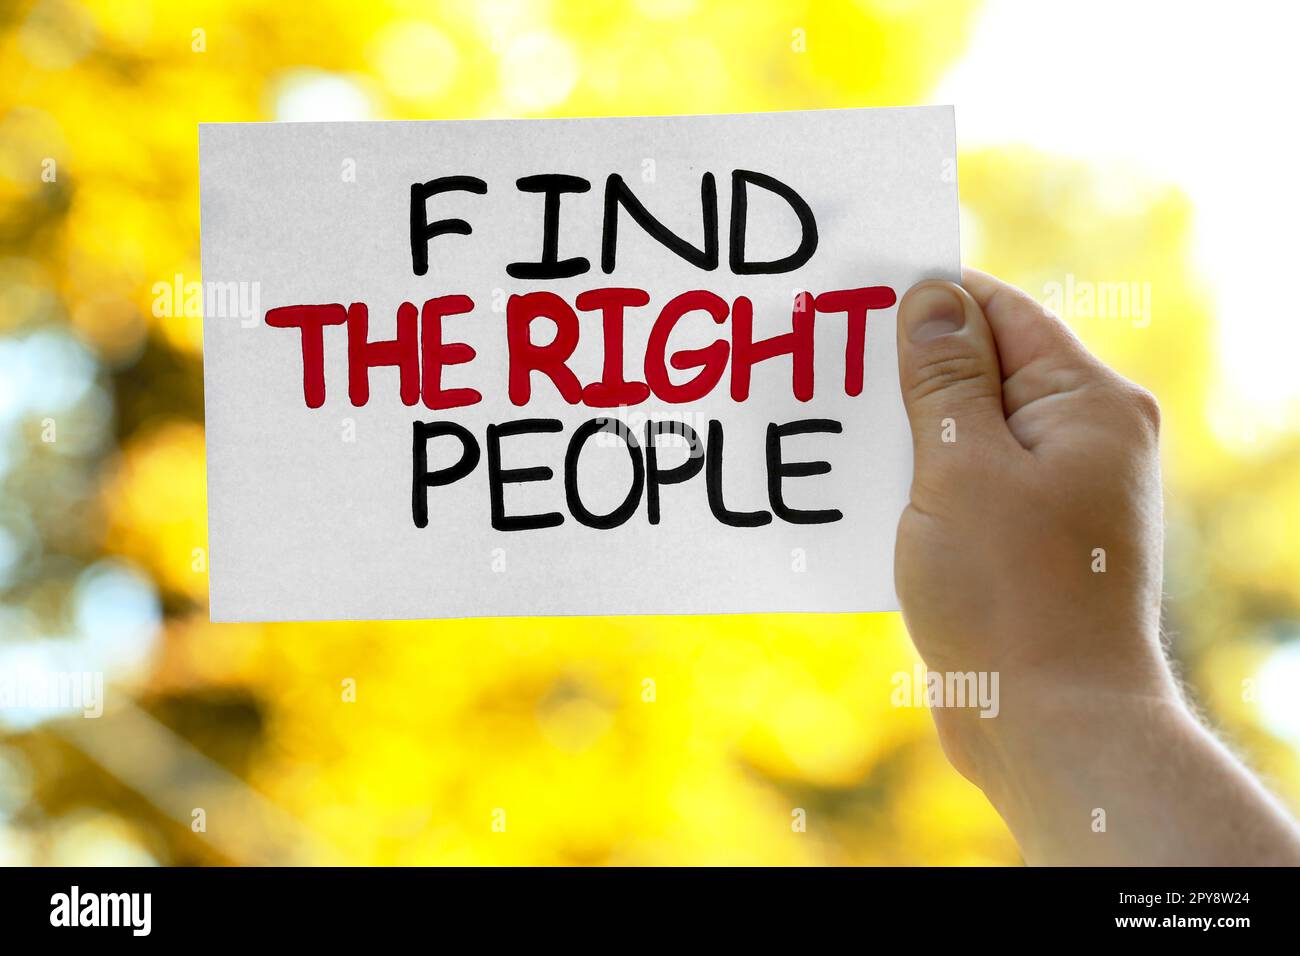 Man holding card with phrase Find The Right People against blurred background, closeup Stock Photo